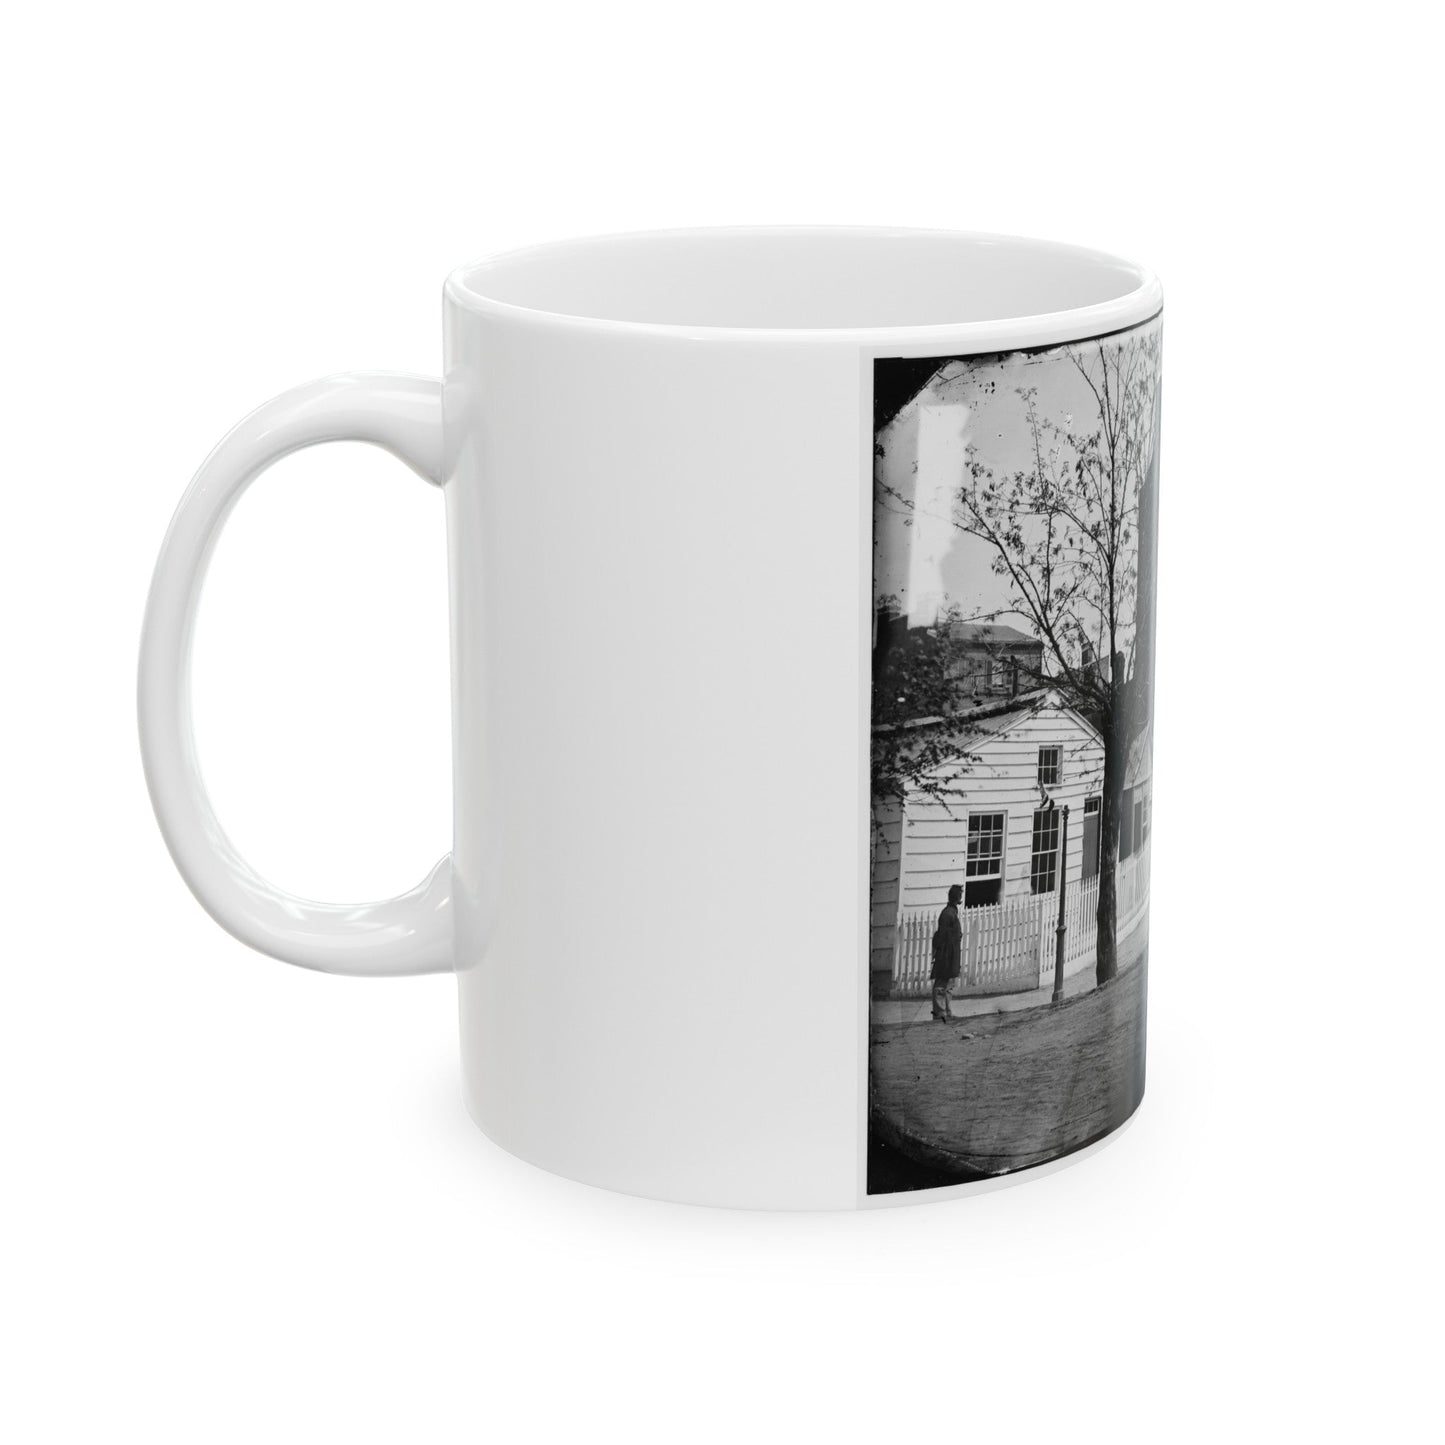 Washington, D.C. Buildings Of The Sanitary Commission Home Lodge For Invalid Soldiers, North Capitol Near C St. (U.S. Civil War) White Coffee Mug